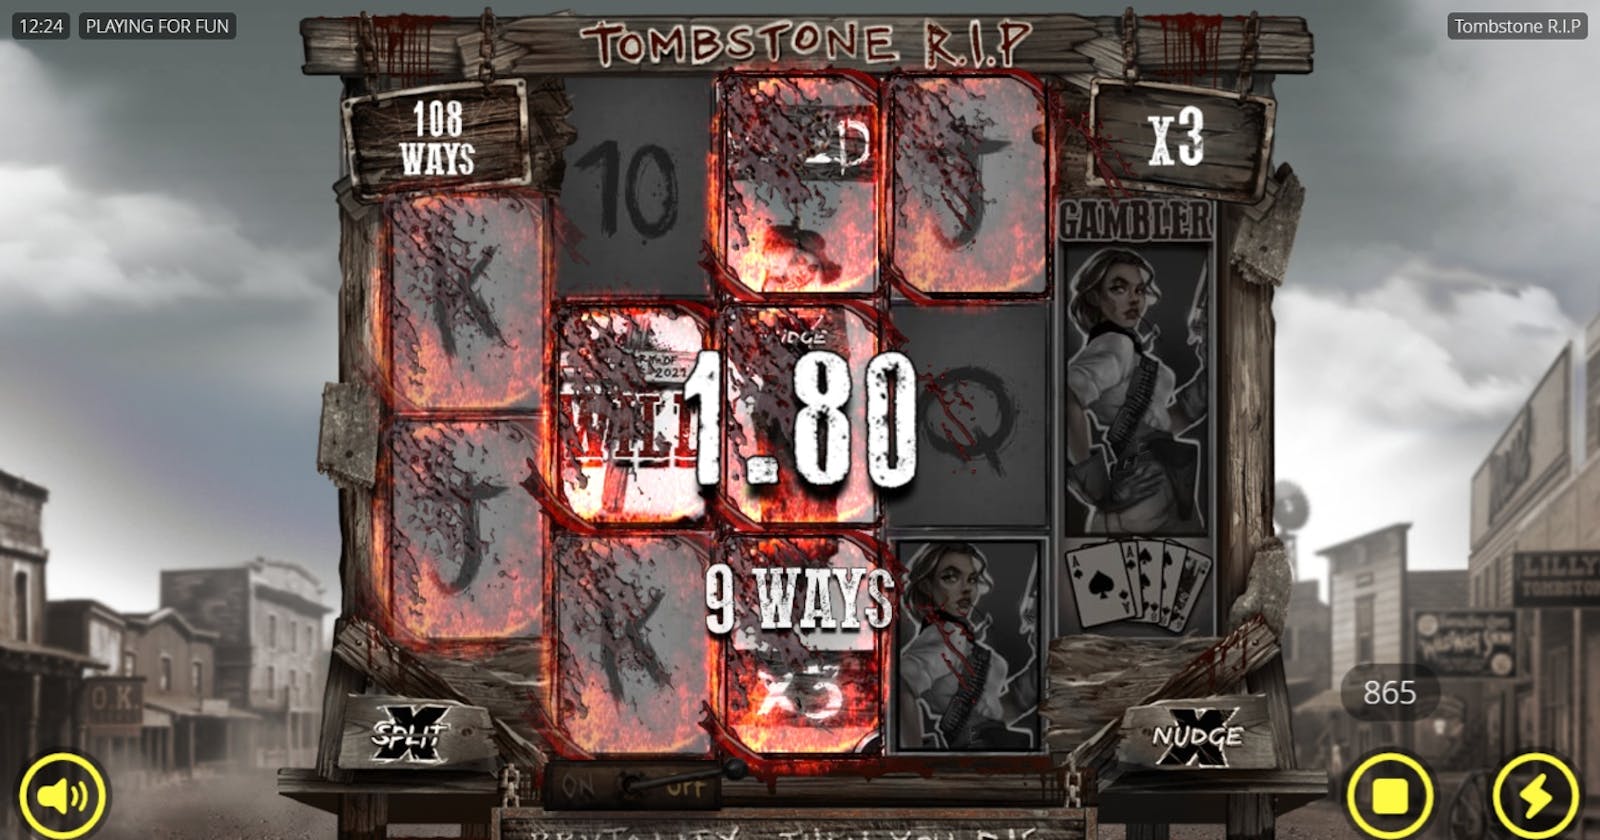 Review Tombstone RIP Slot Demo - RTP 96.08%